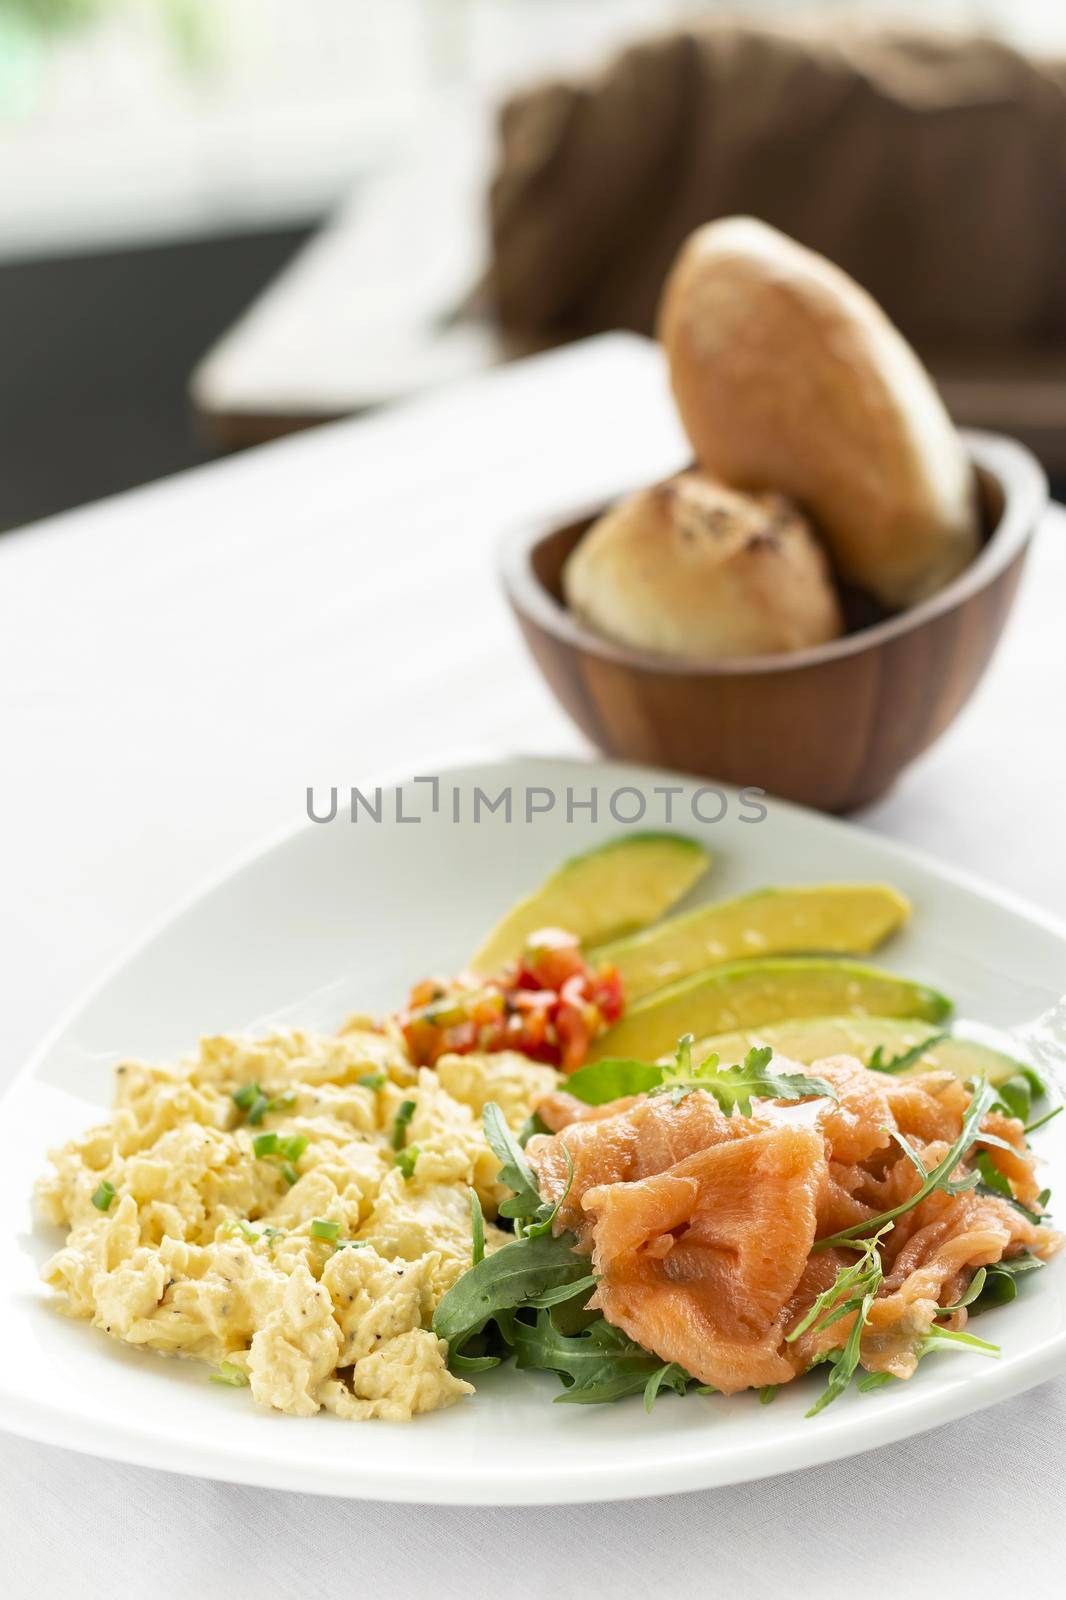 scrambled eggs with smoked salmon and avocado healthy breakfast on restaurant table